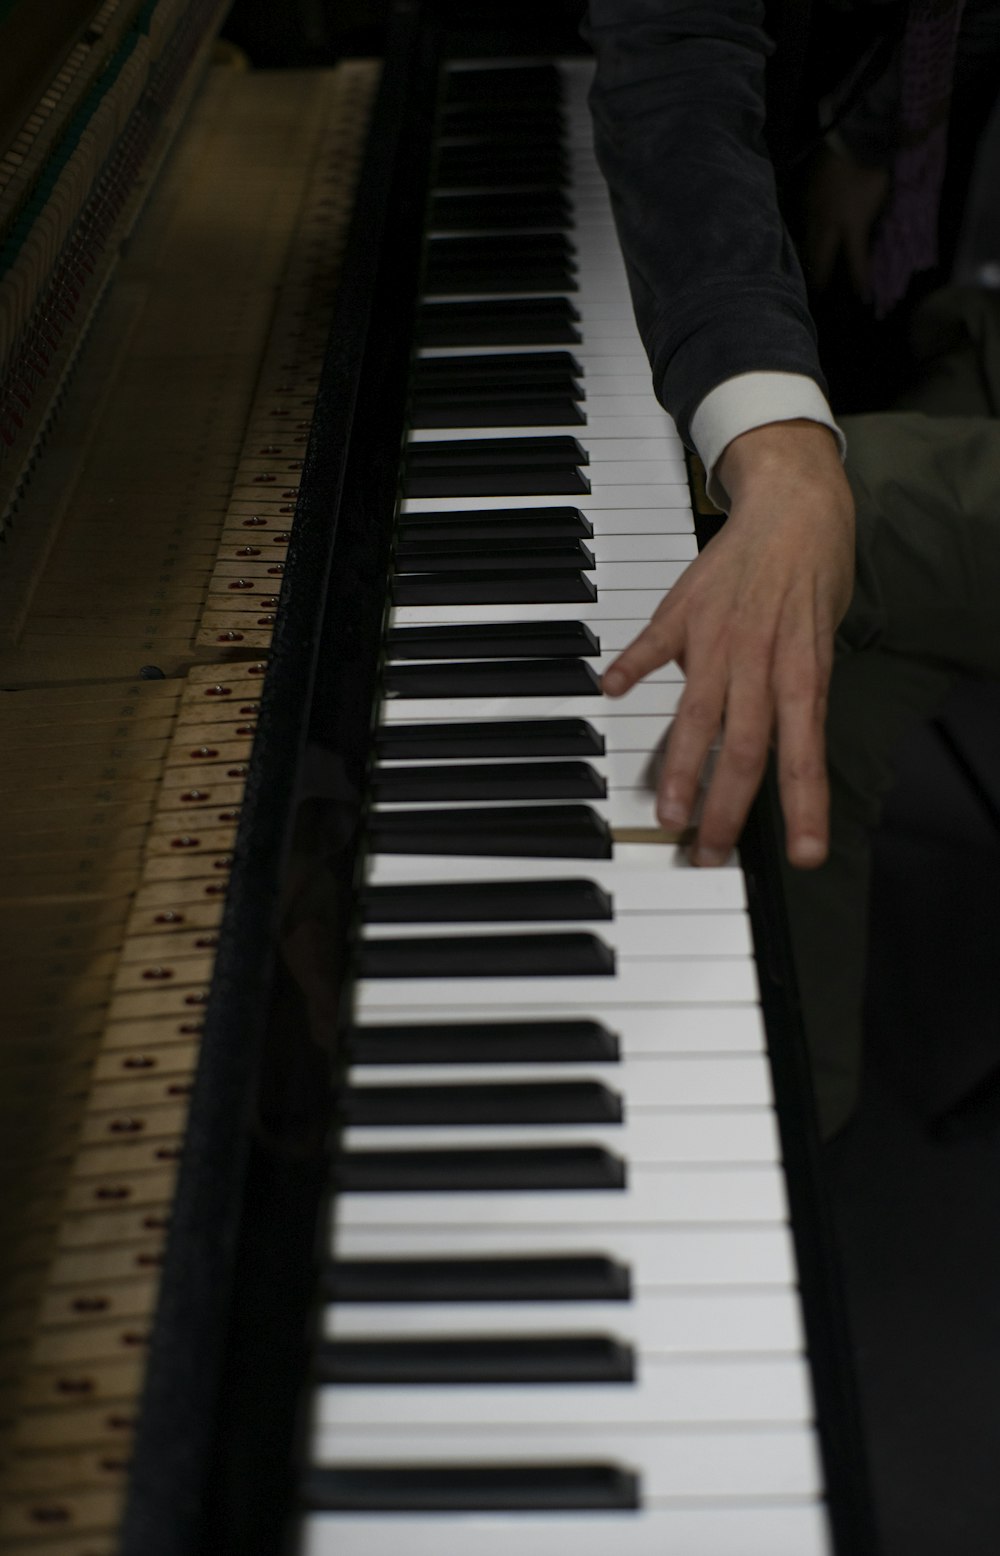 a person sitting at a piano with their hand on the keys